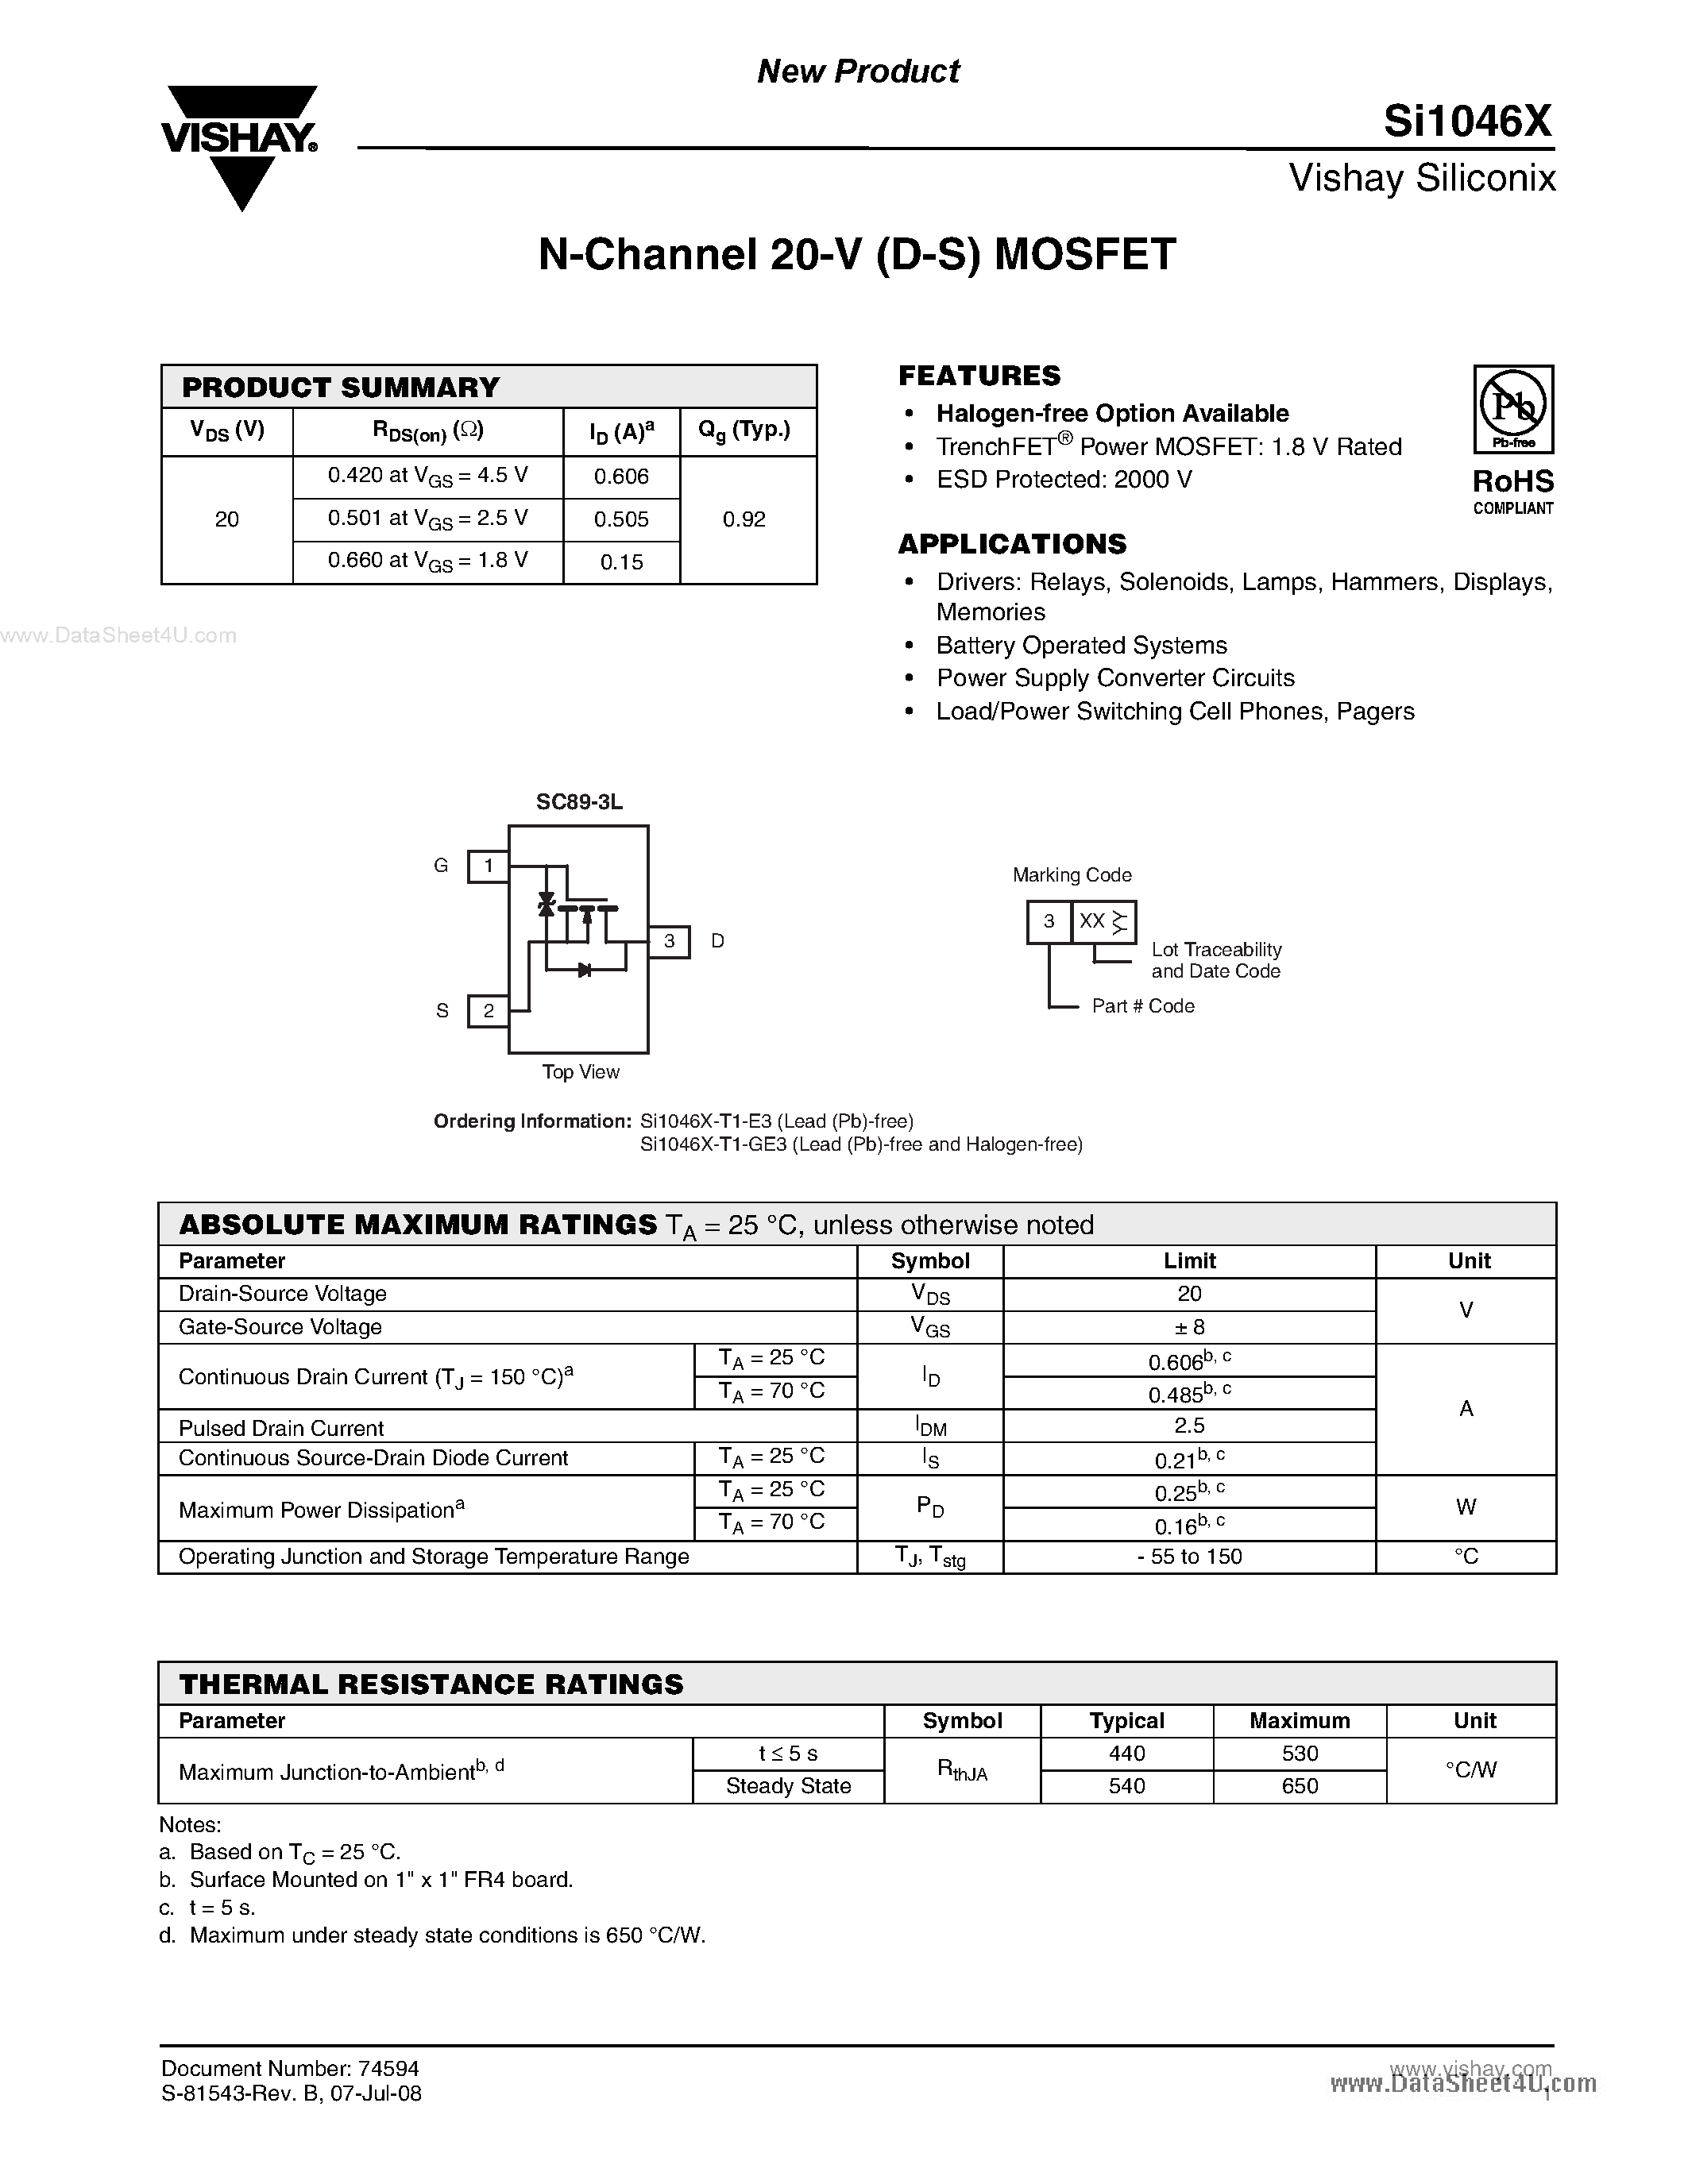 Datasheet SI1046X - N-Channel MOSFET page 1